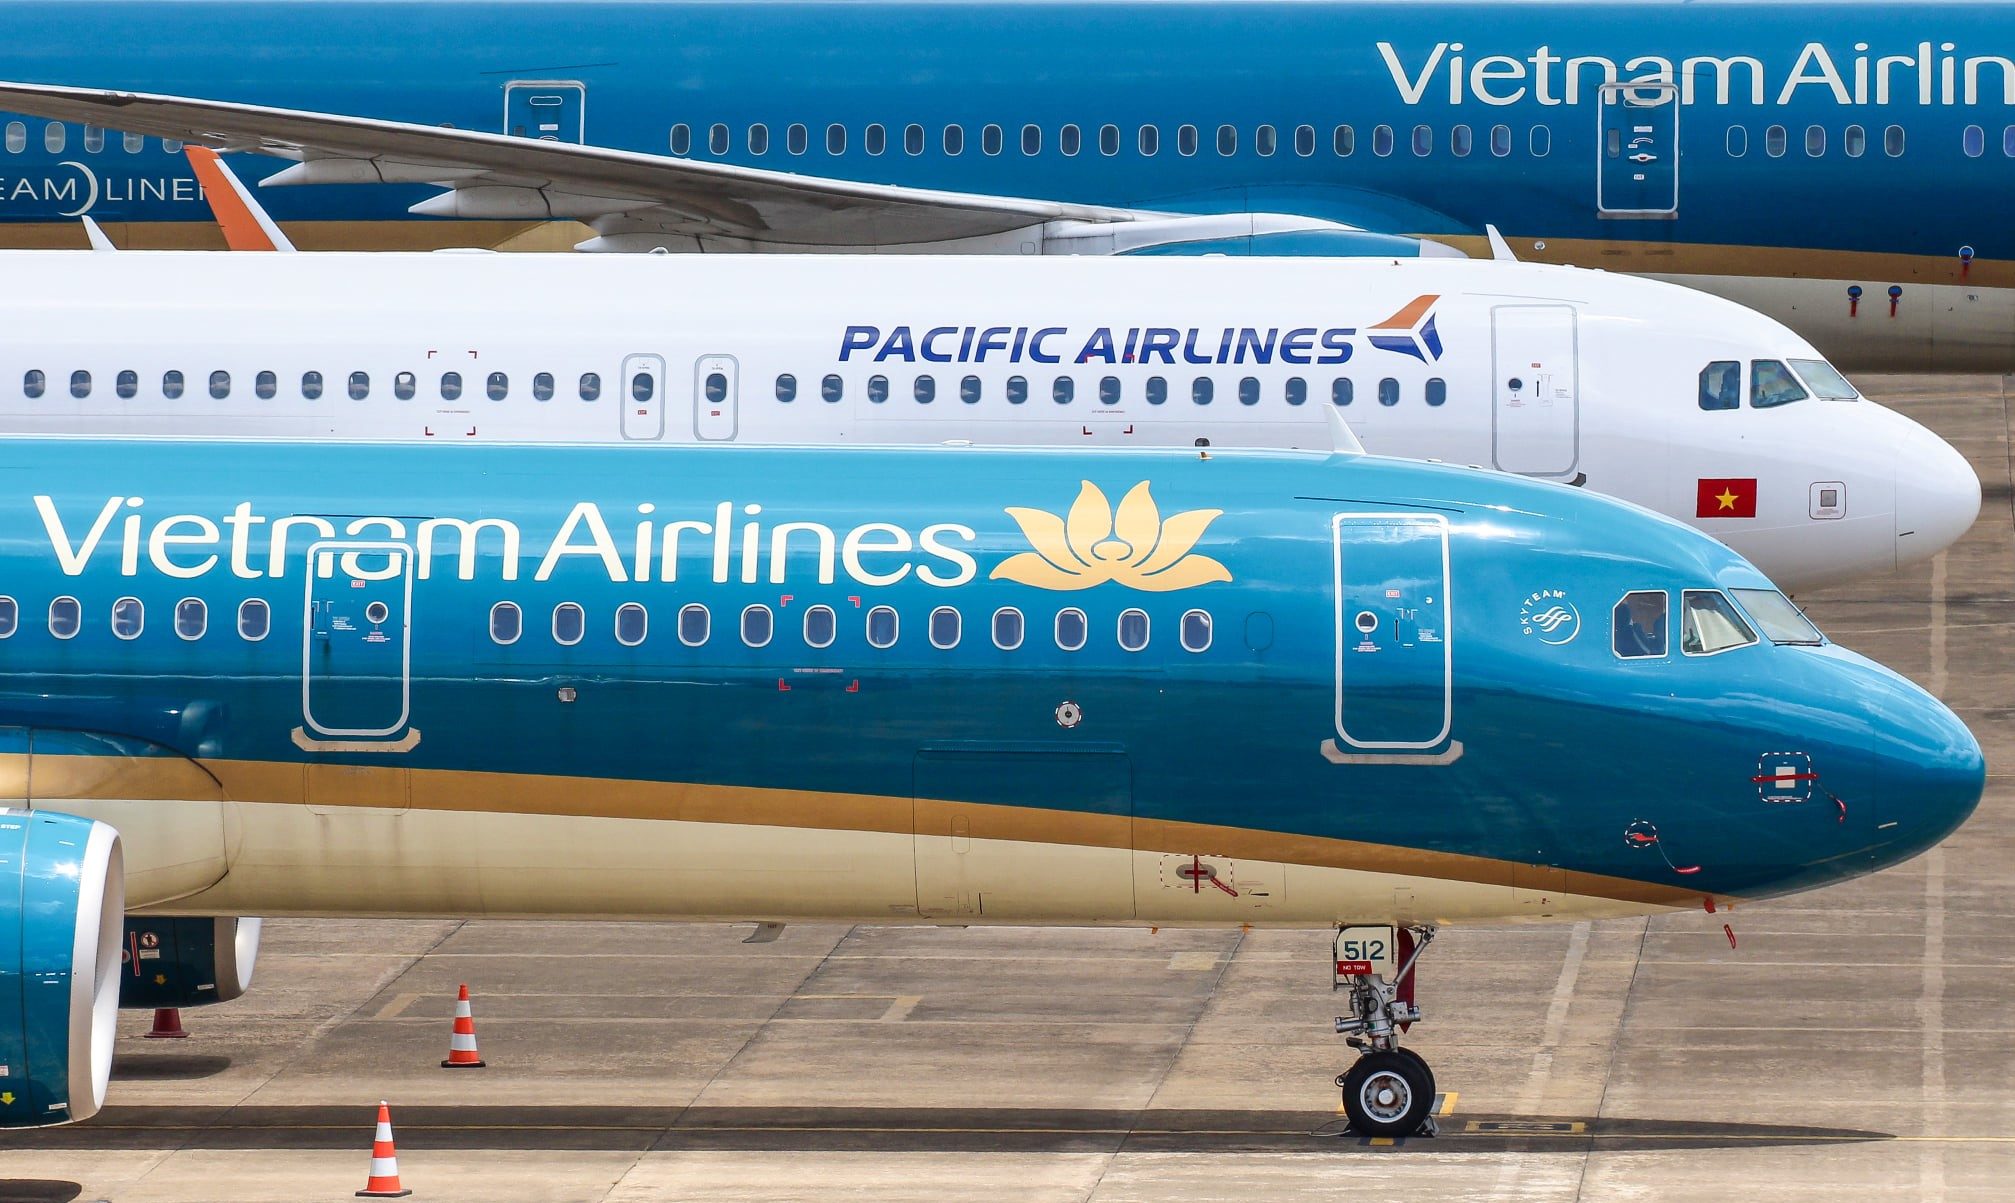 Qantas to exit its low-cost aviation JV with Vietnam Airlines in a "giveaway deal"